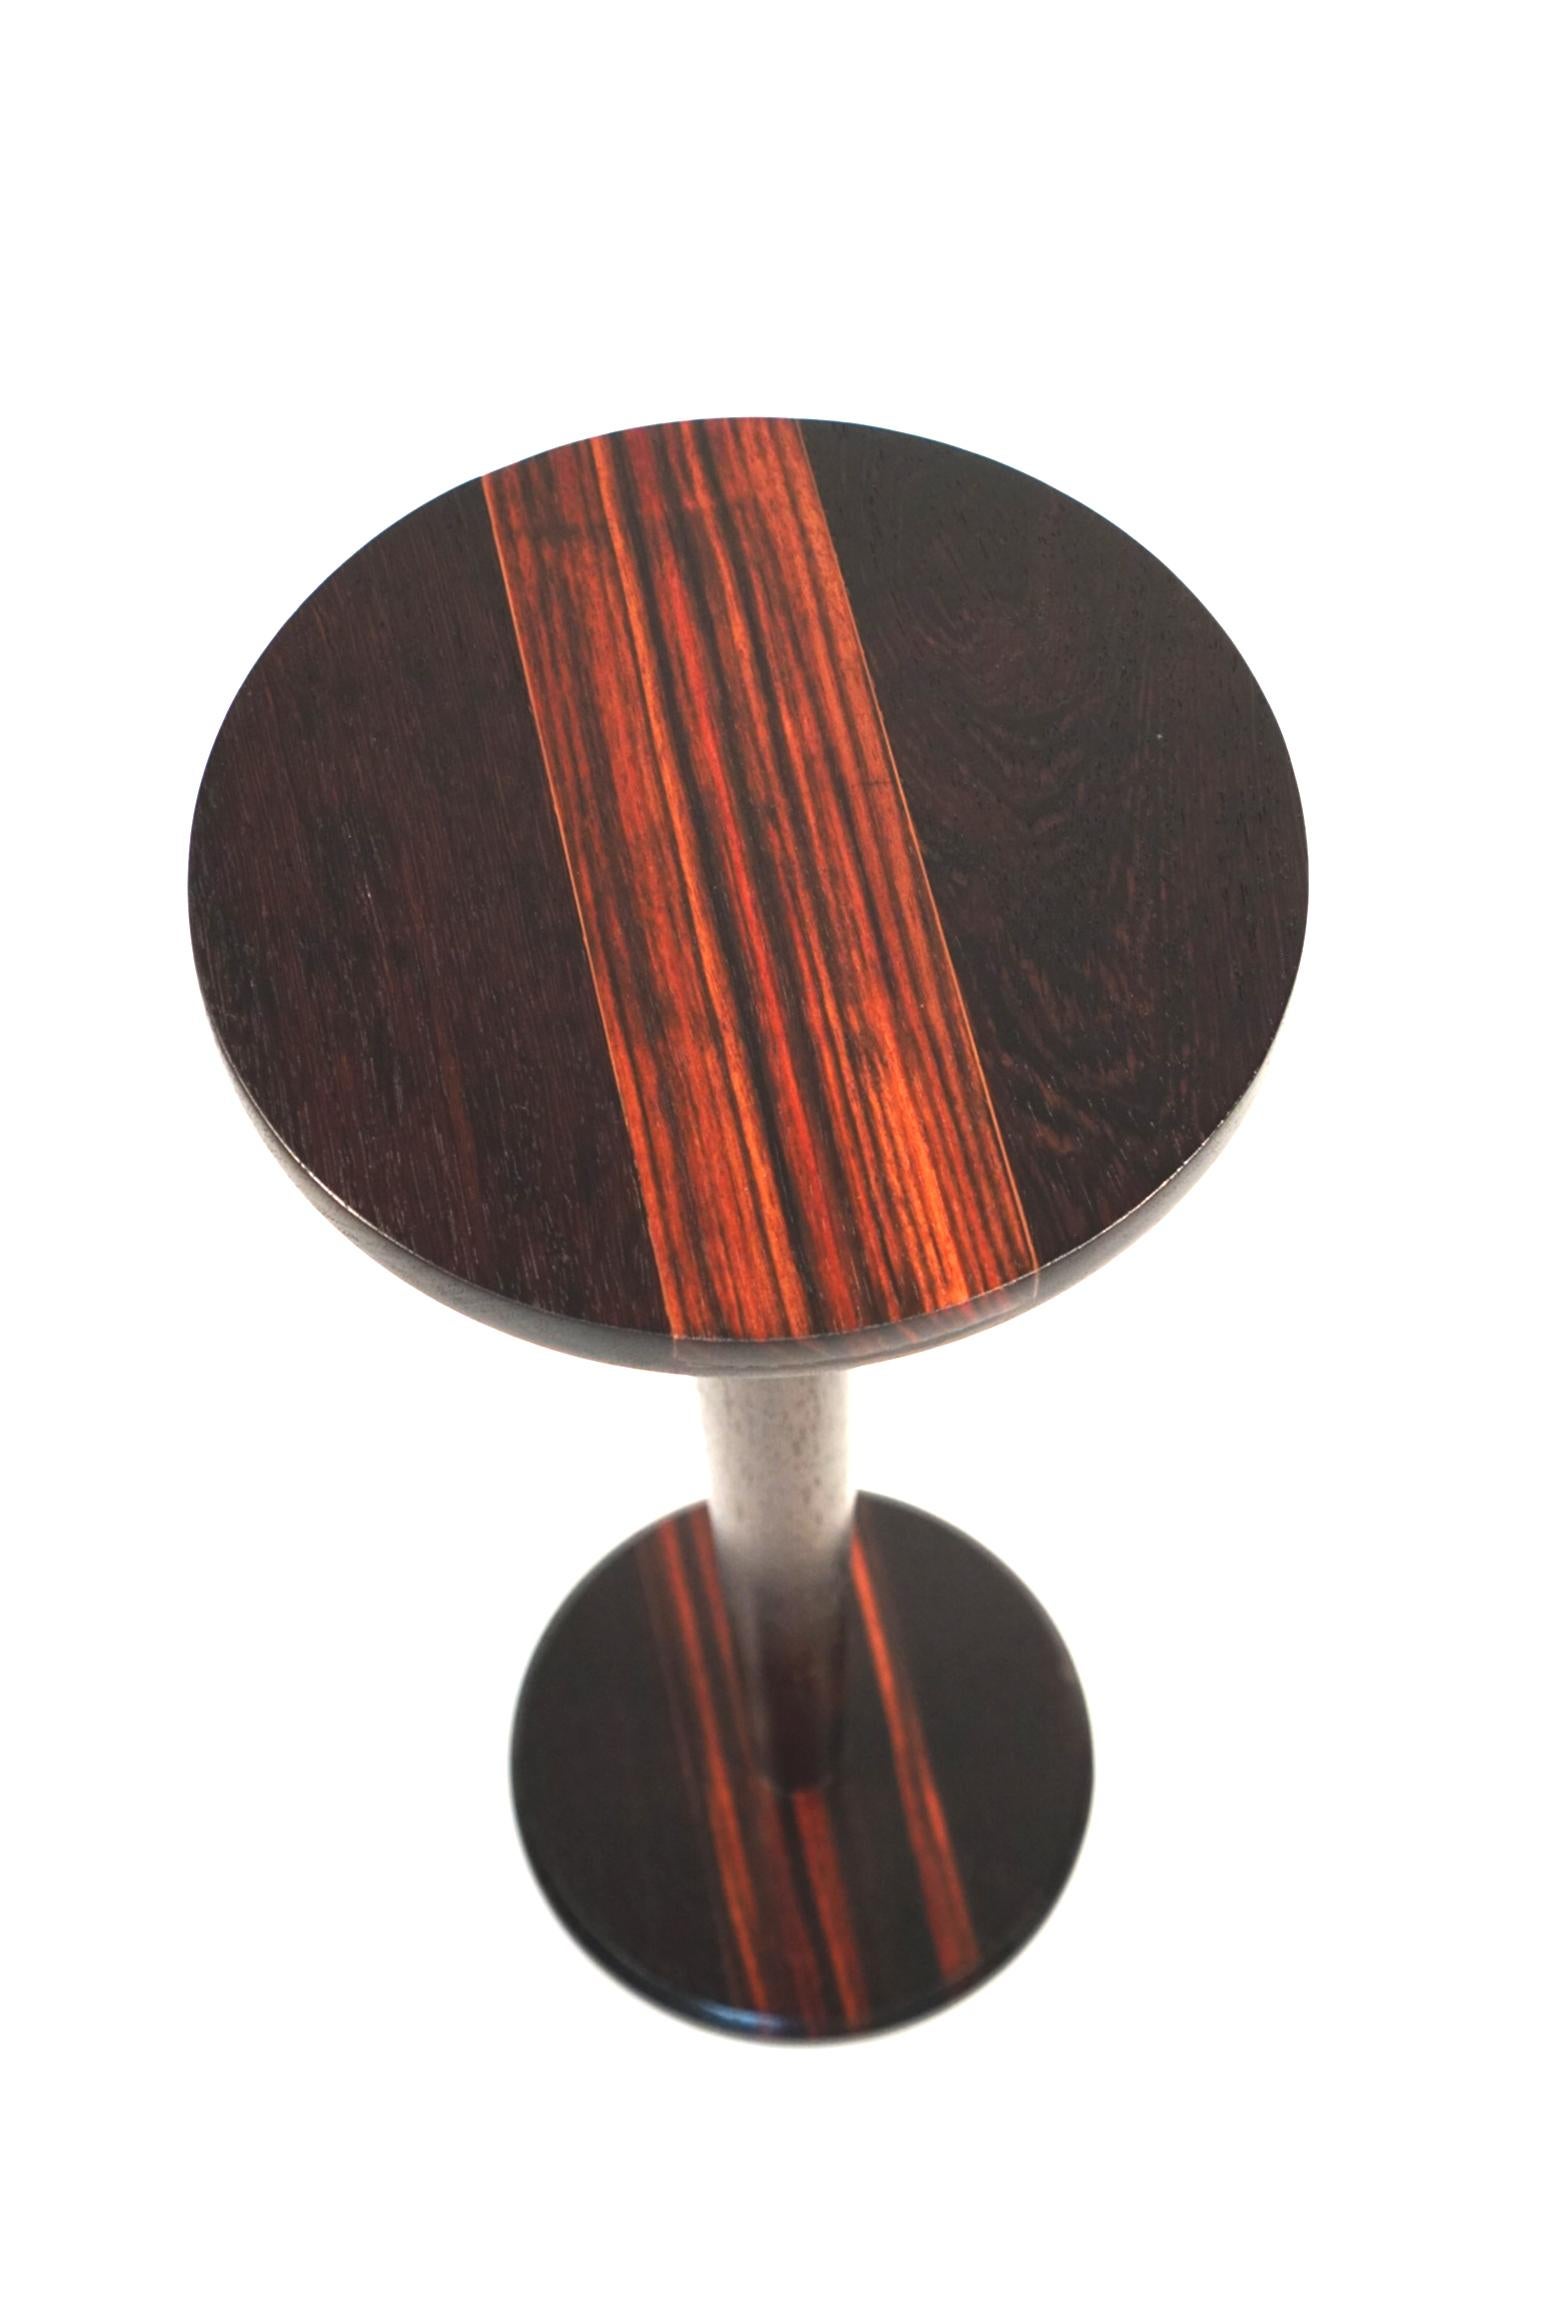 Varnished 21st Century Mid-Century Modern Inspired Wenge and Macassar Ebony Cocktail Table For Sale